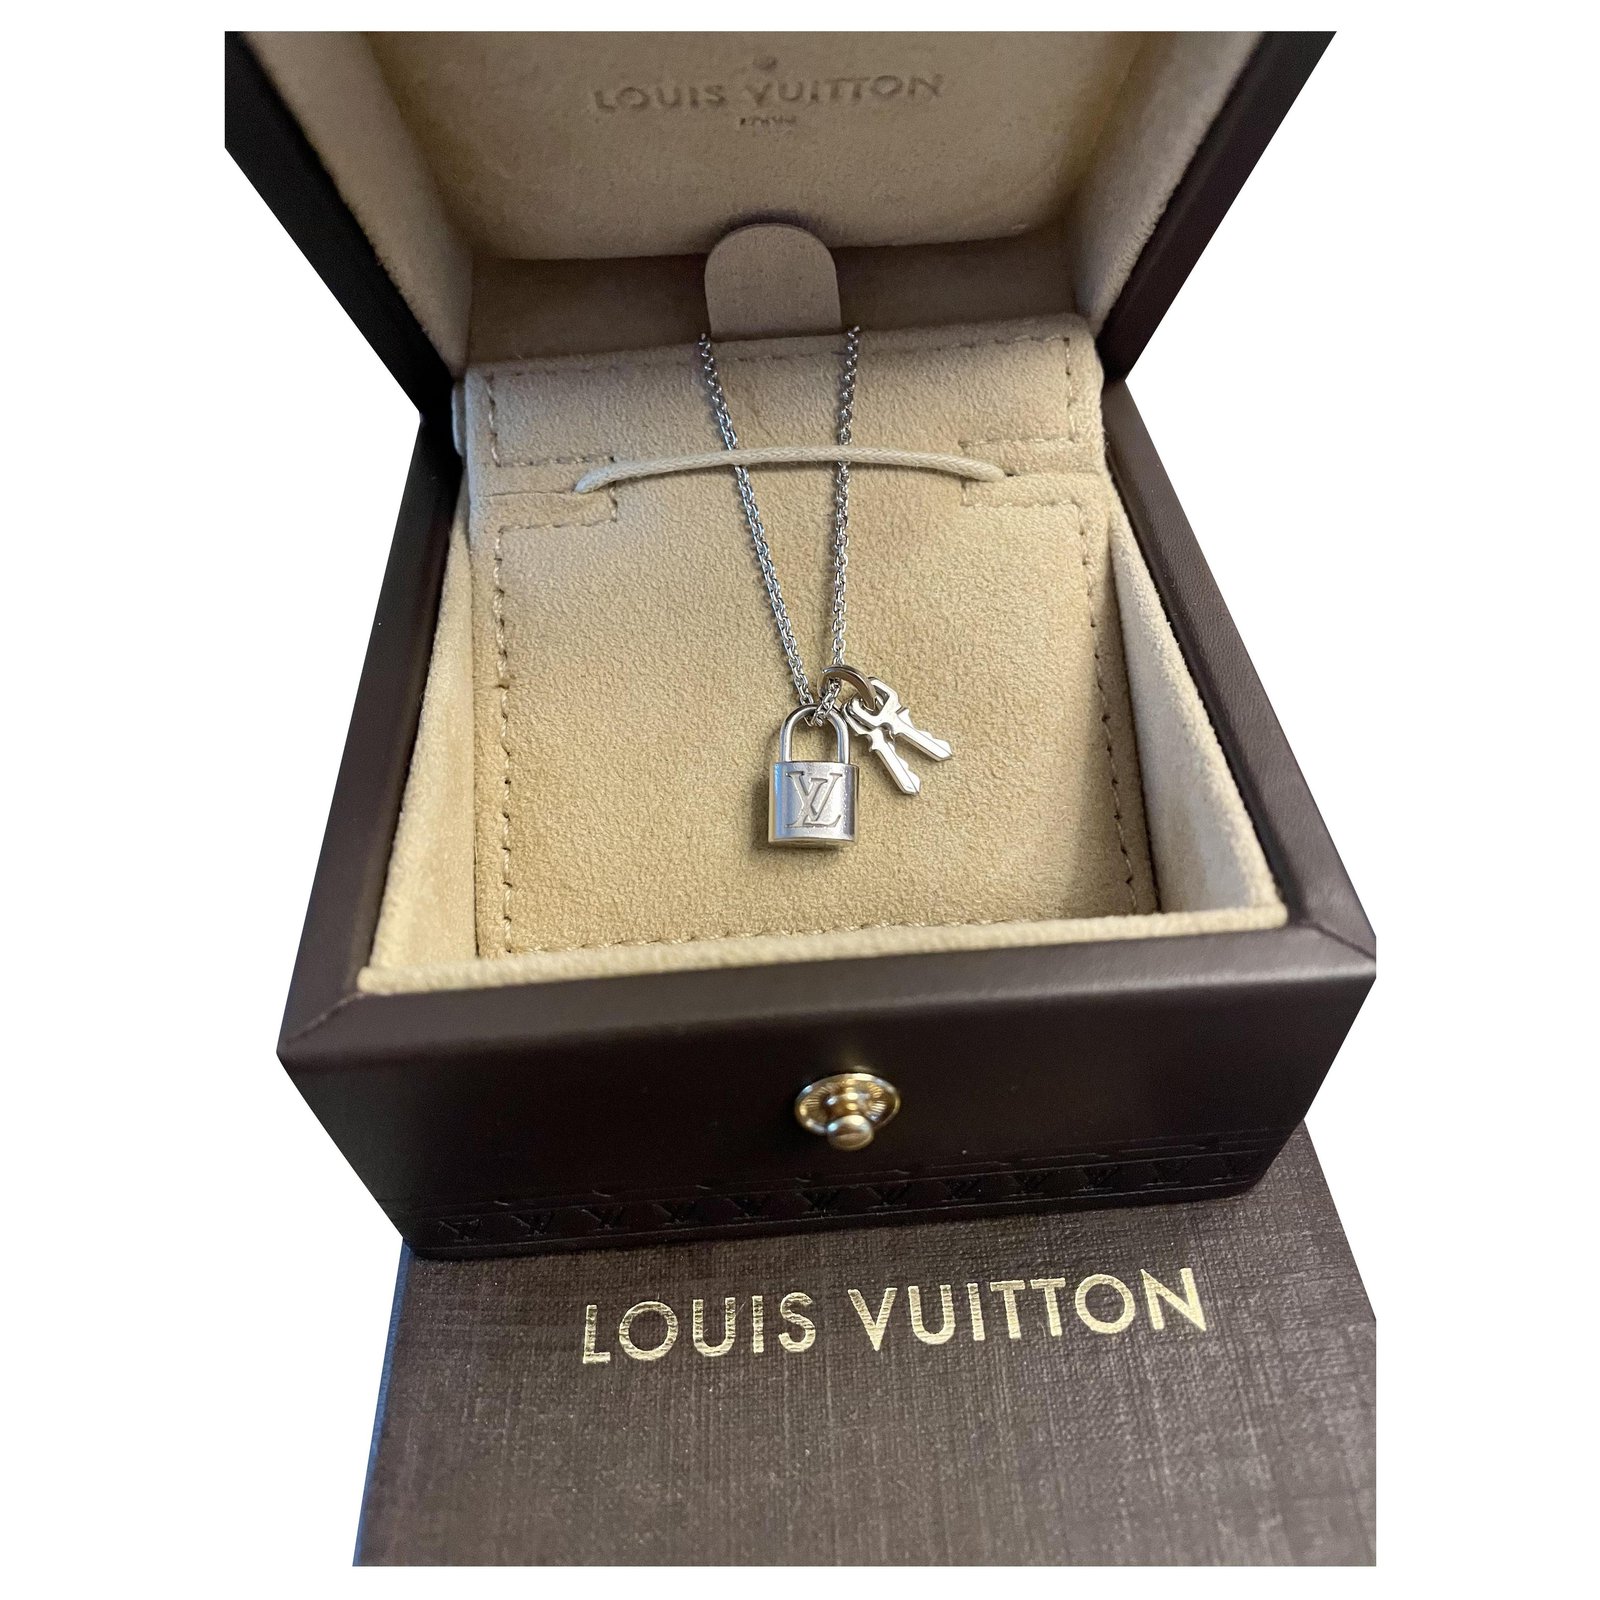 Louis Vuitton Lockit white gold necklace with lock and keys